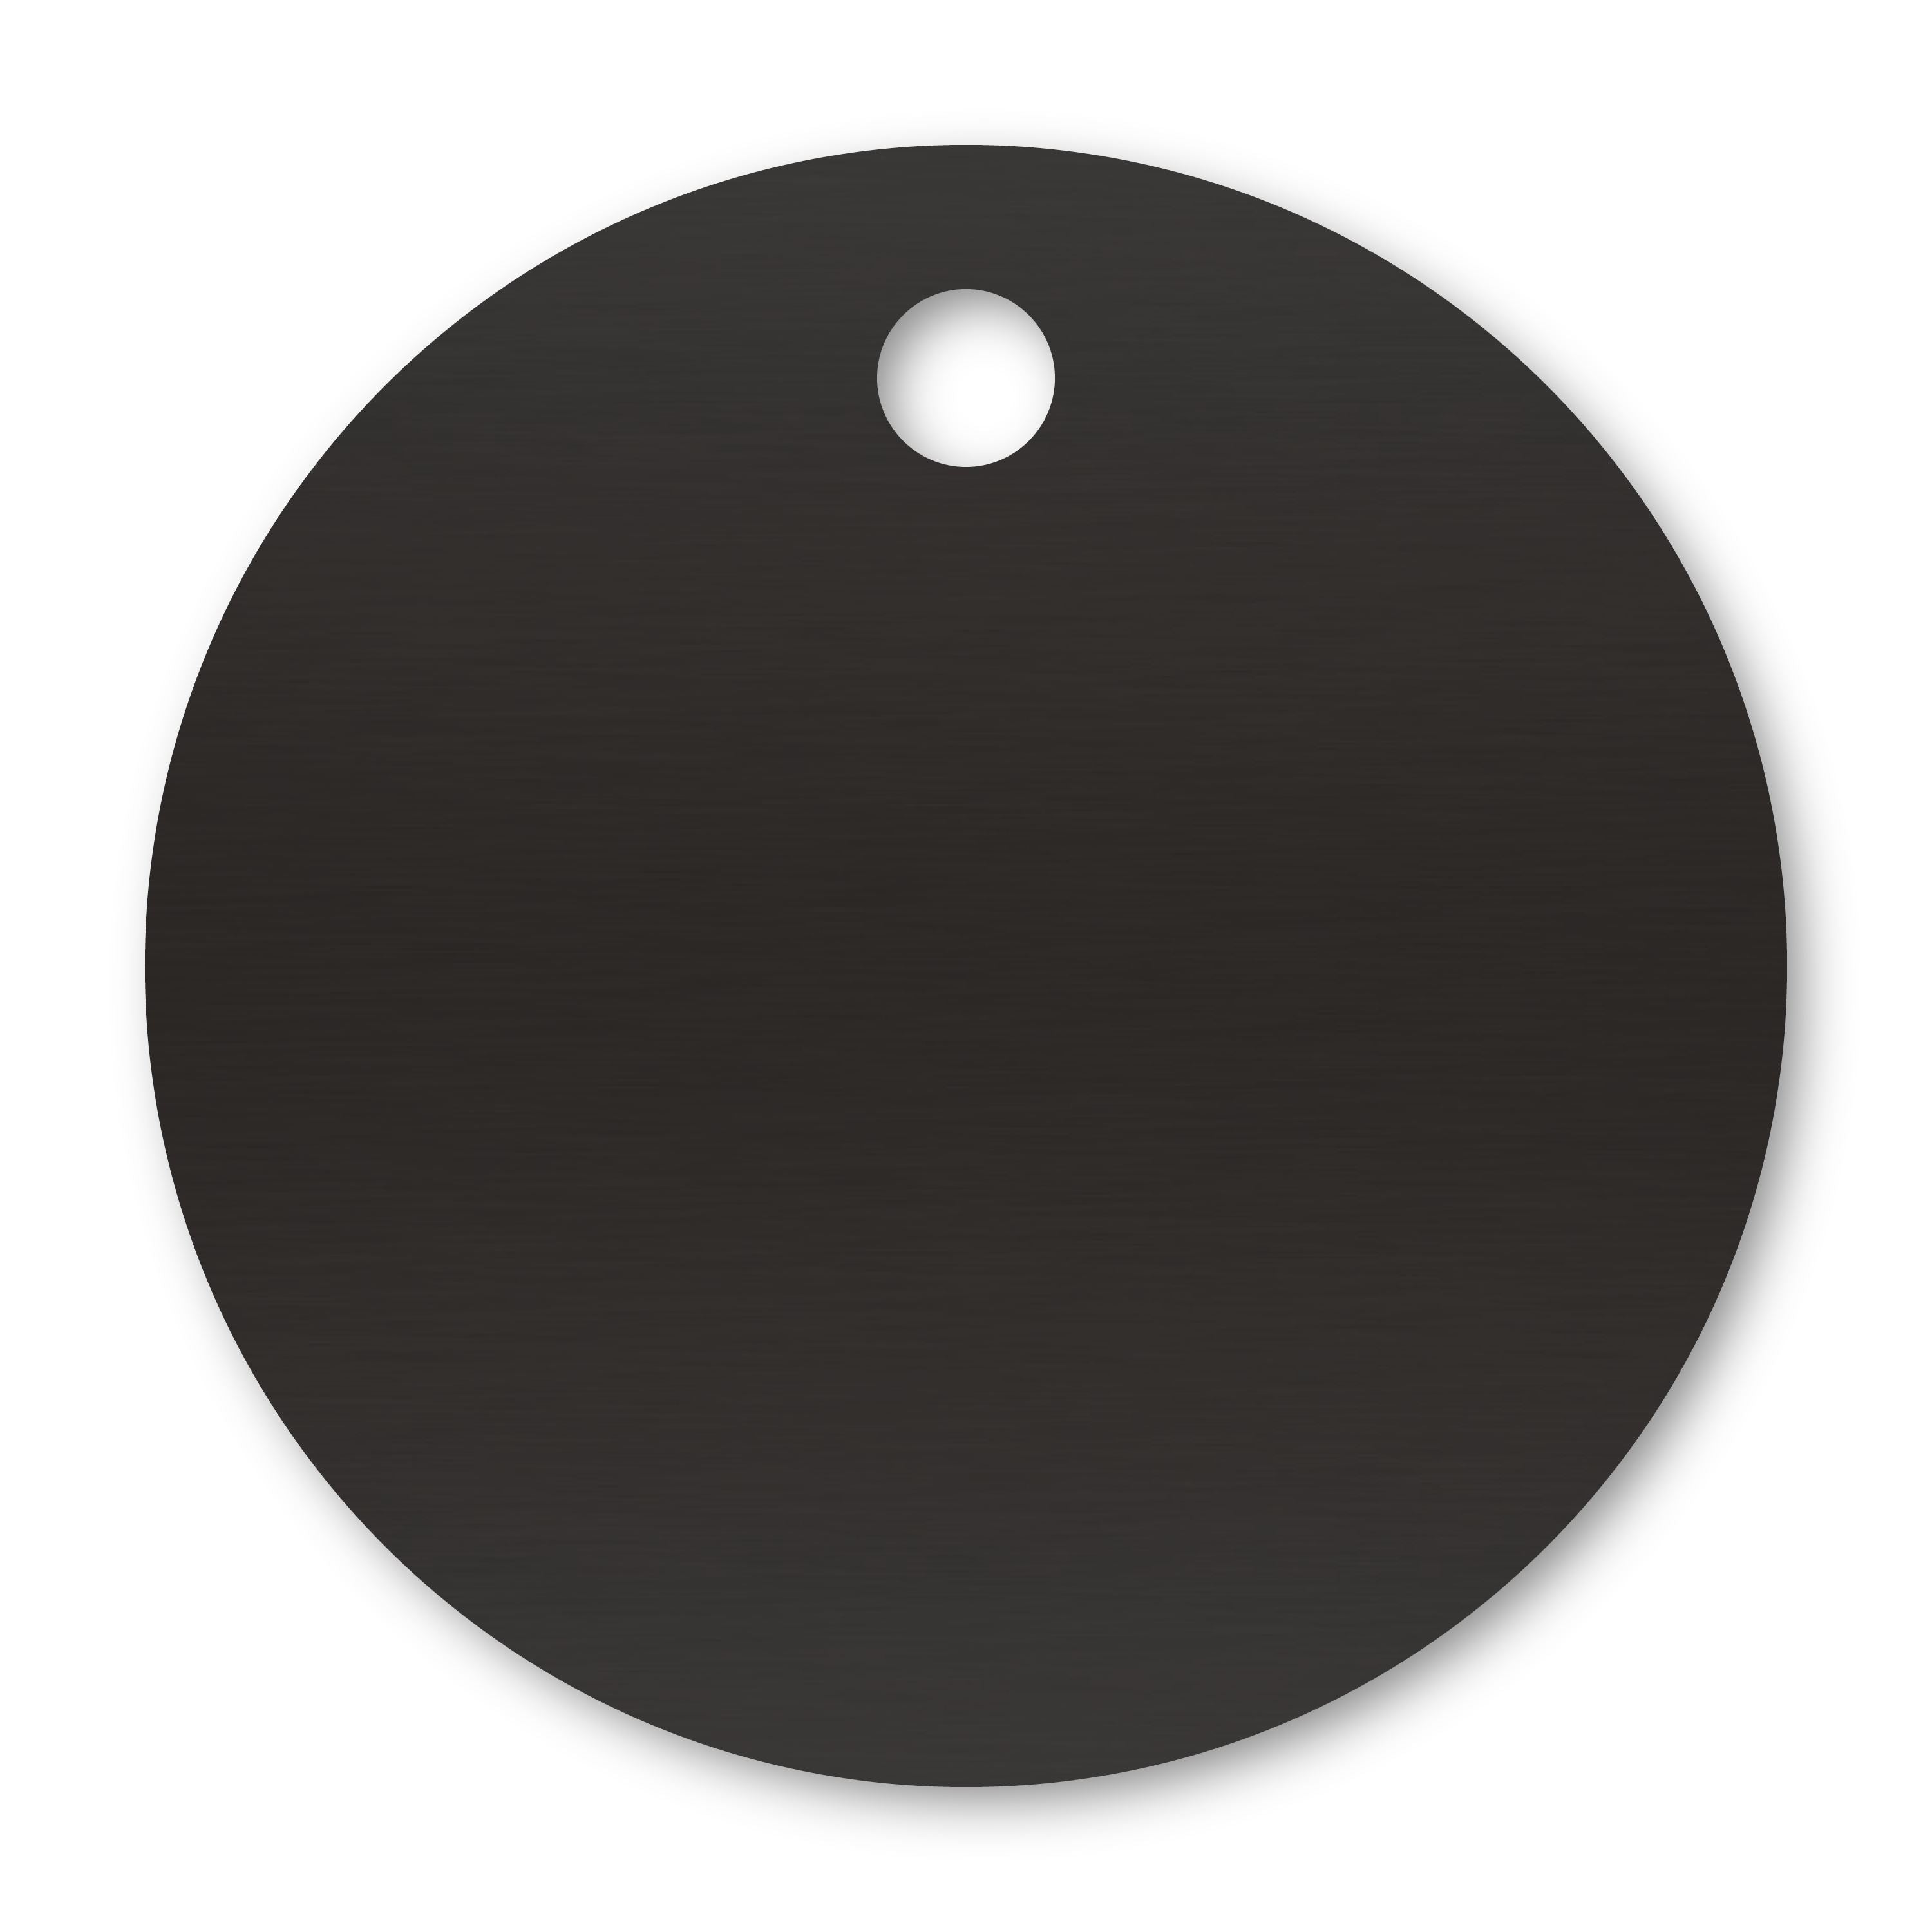 Anodized Aluminum Round Tags, 7/8" with 3/32" Hole, Laser Engraved Metal Tags Craftworks NW Black 